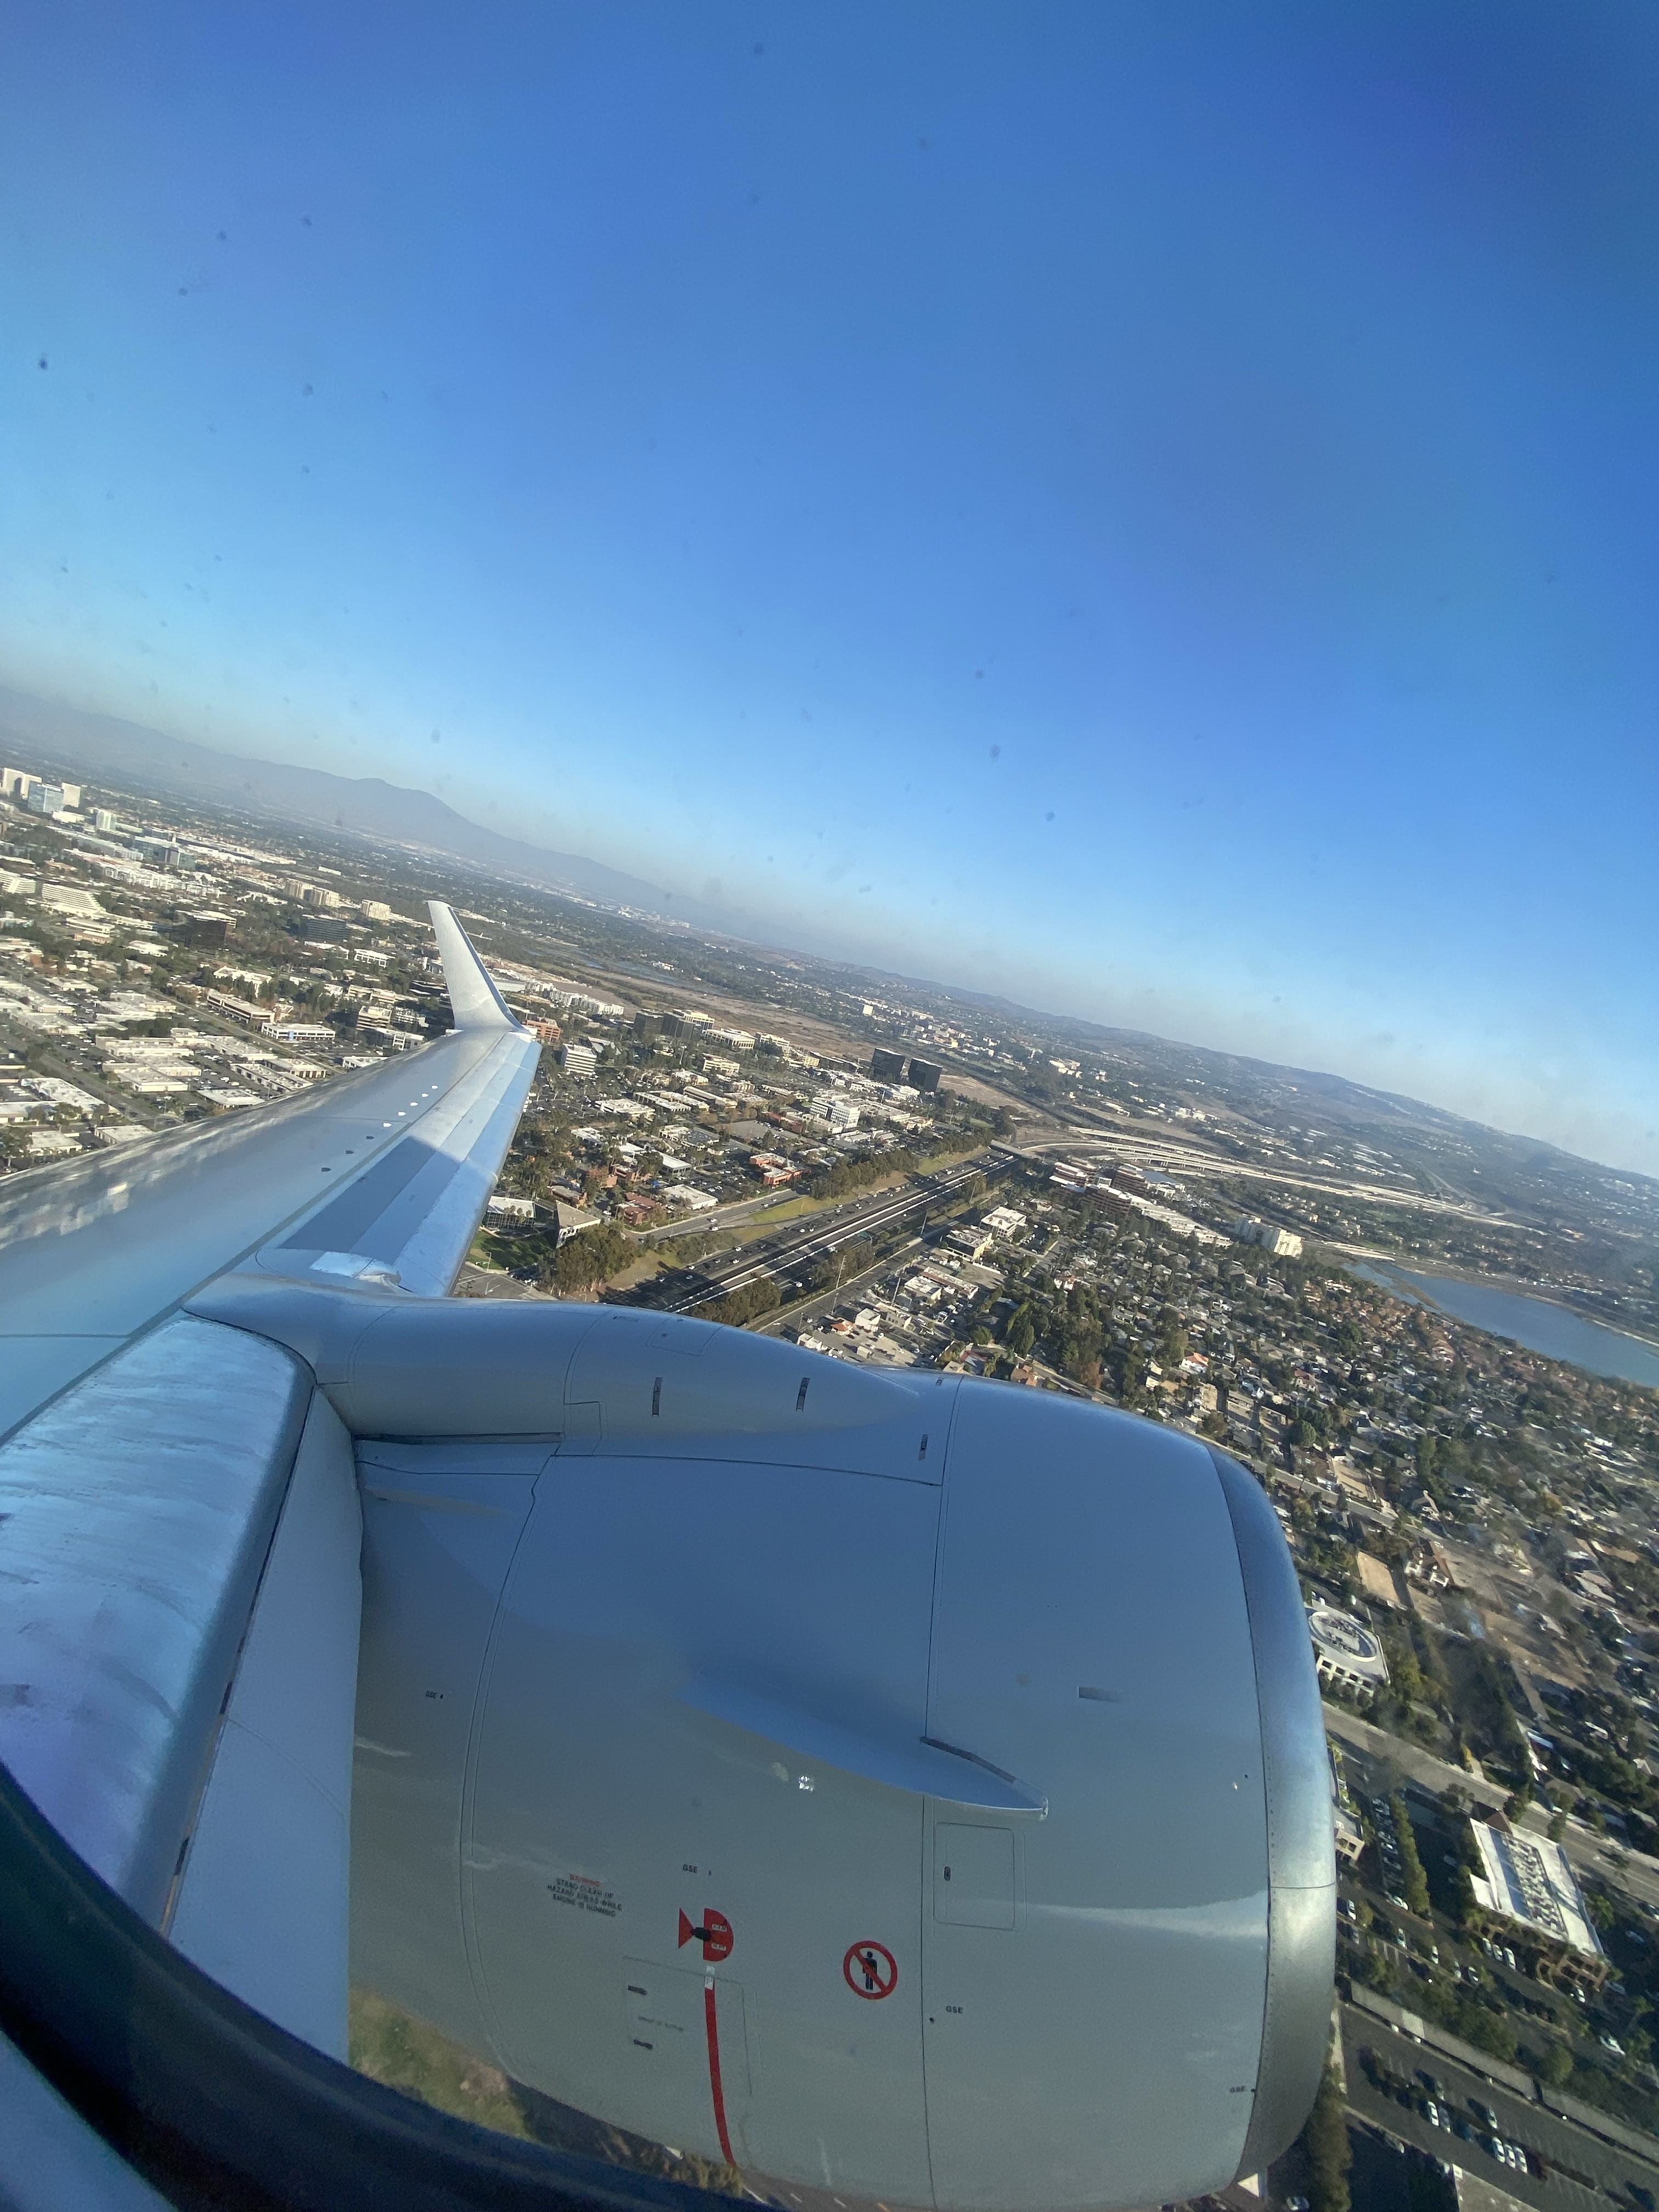 view of an airplane engine & wing from the cabin during takeoff on a sunny day